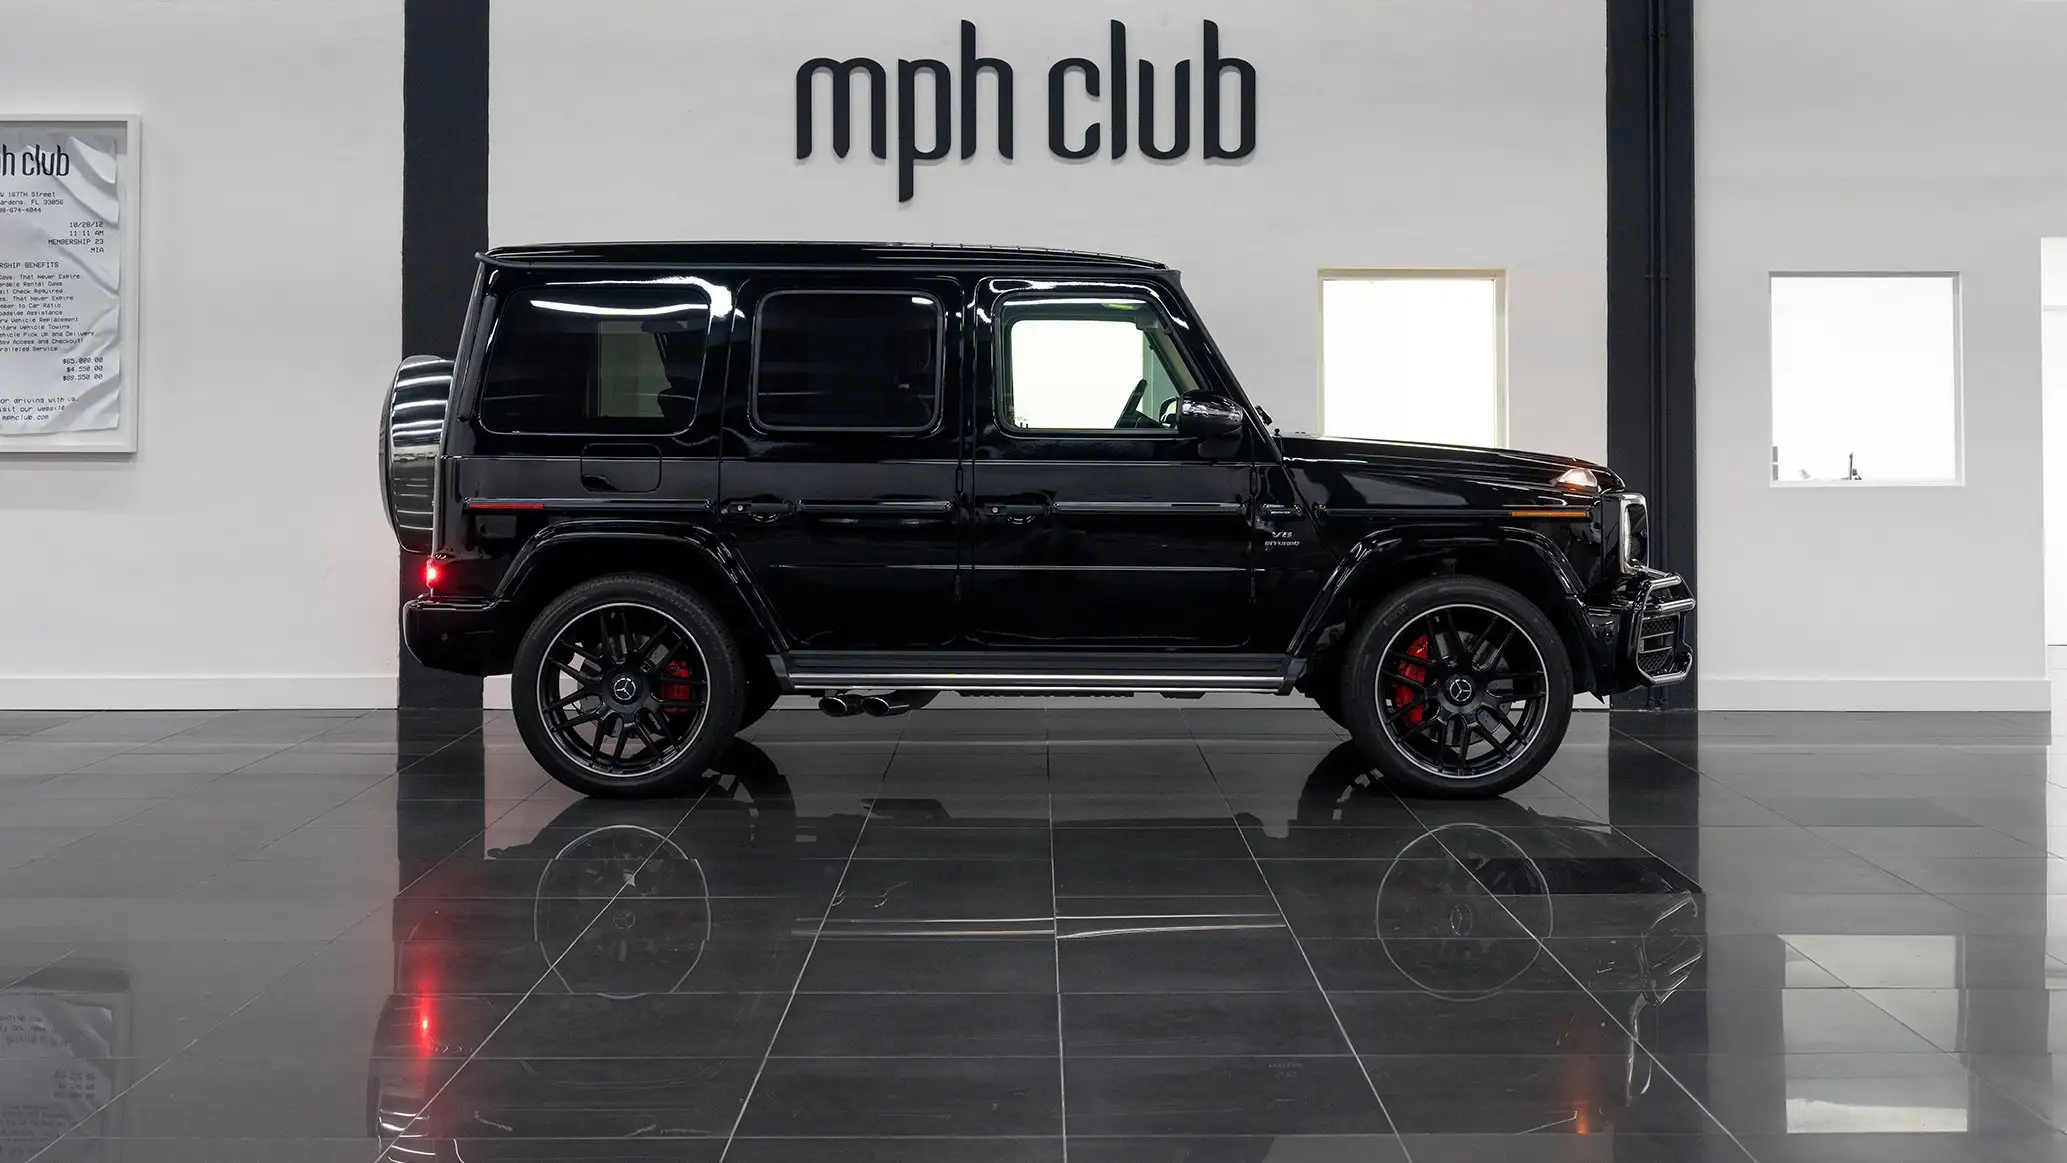 2020 black on white mercedes benz amg g63 for sale mph club 5